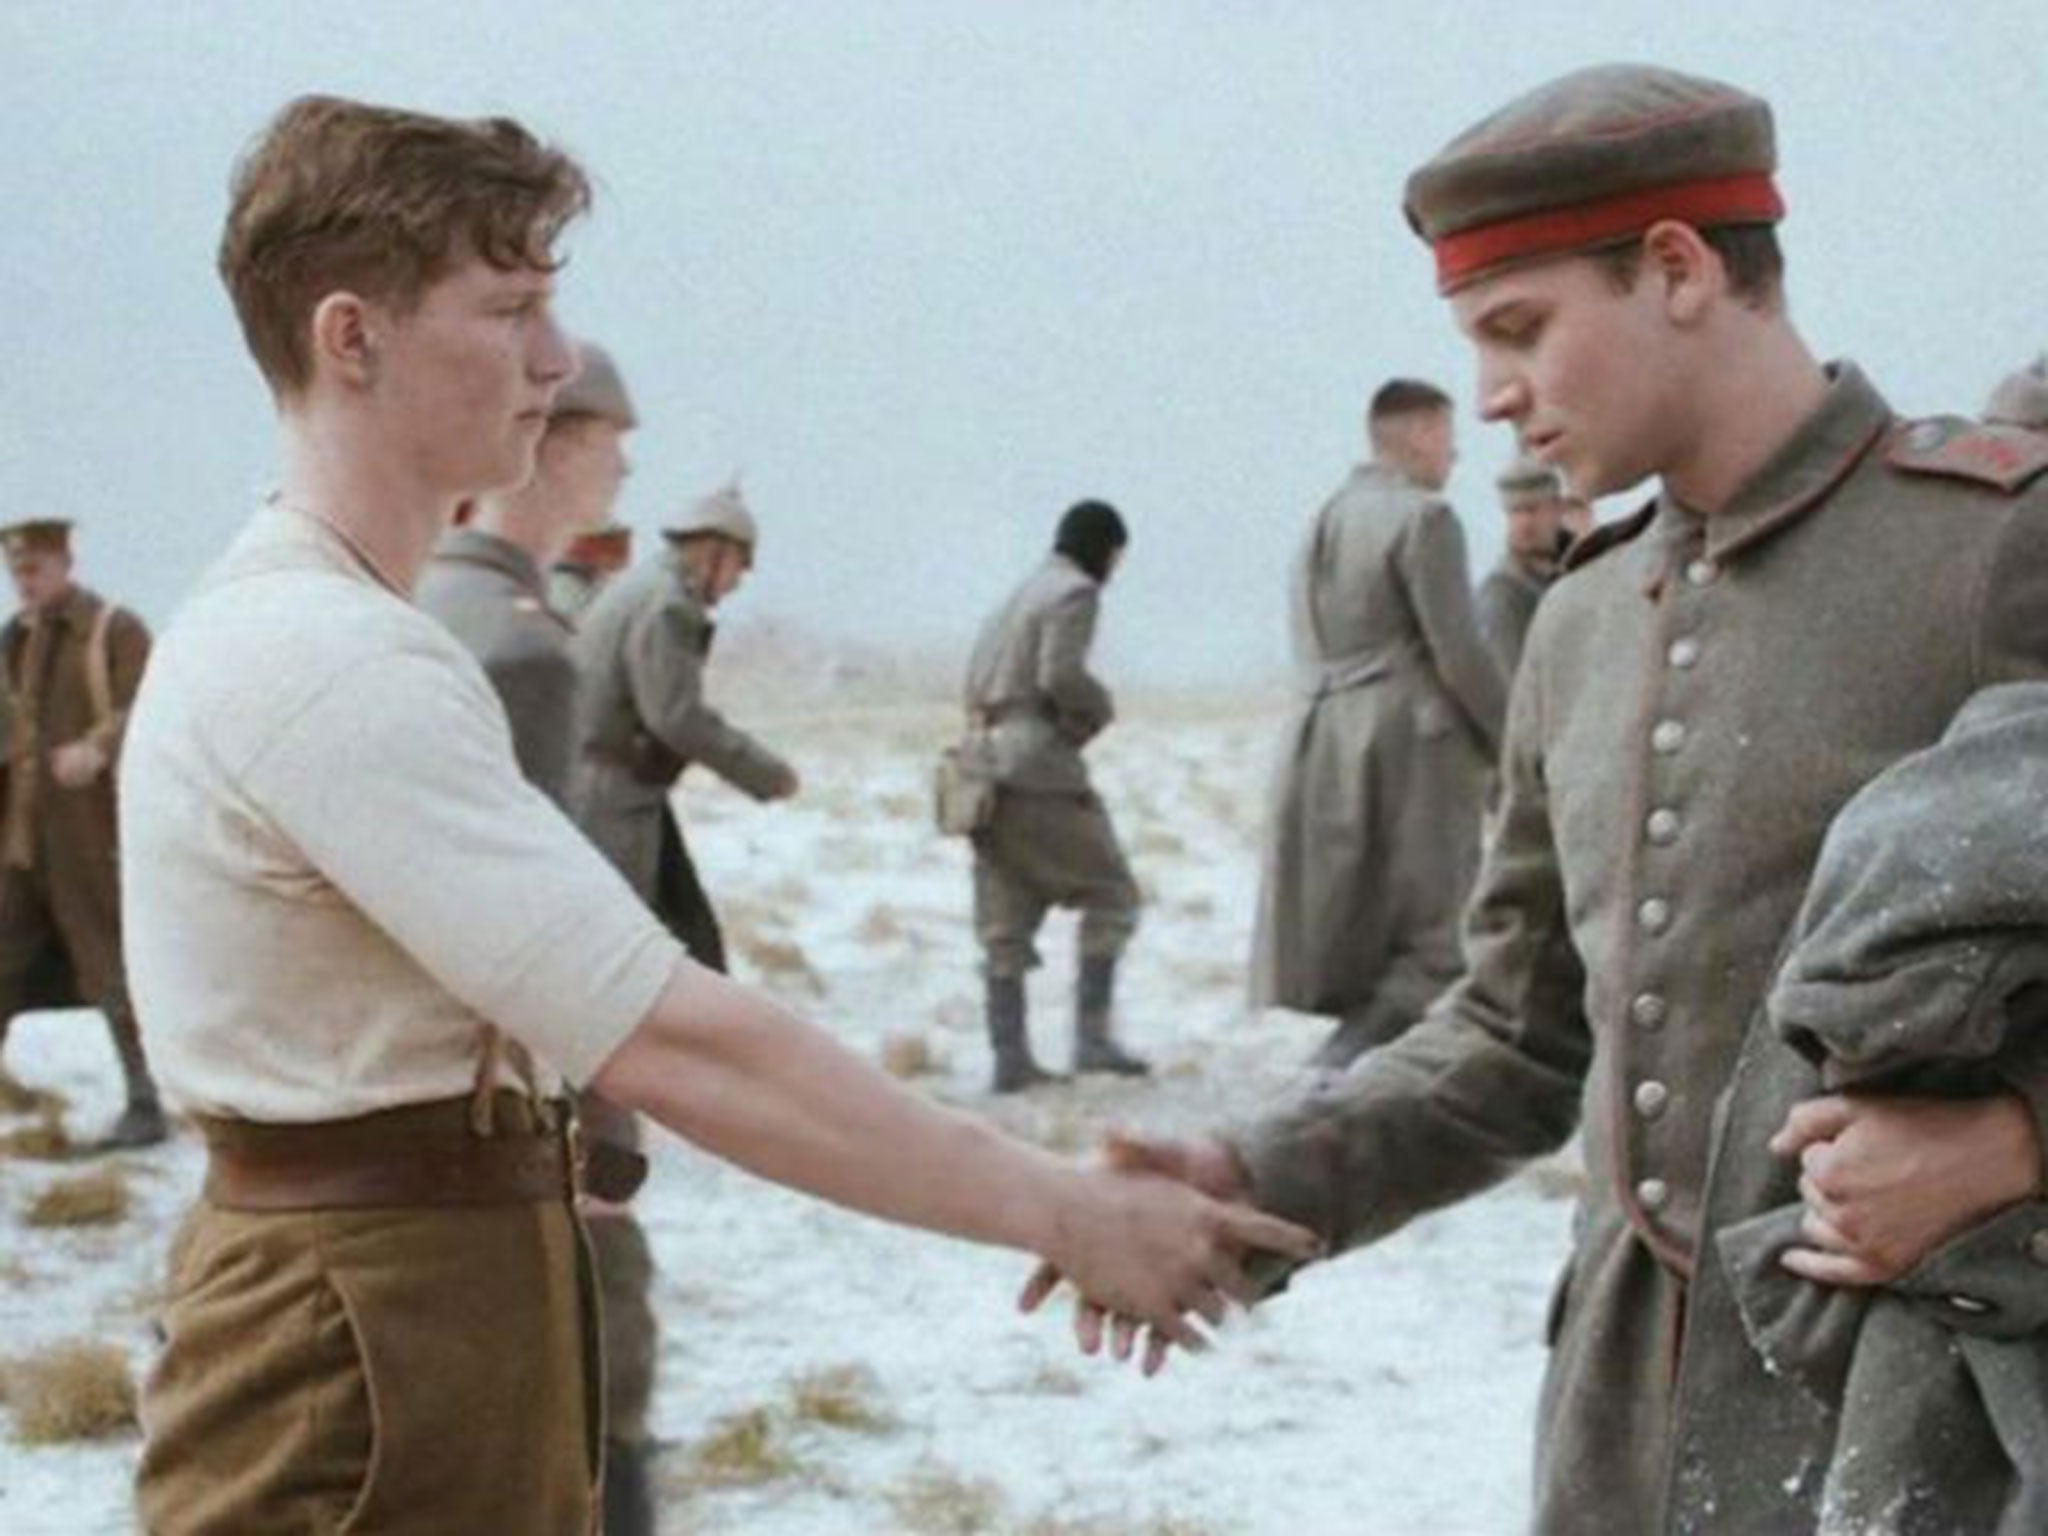 The Christmas Day truce as shown in the Sainsbury's ad is a reminder of how humans cling to peace